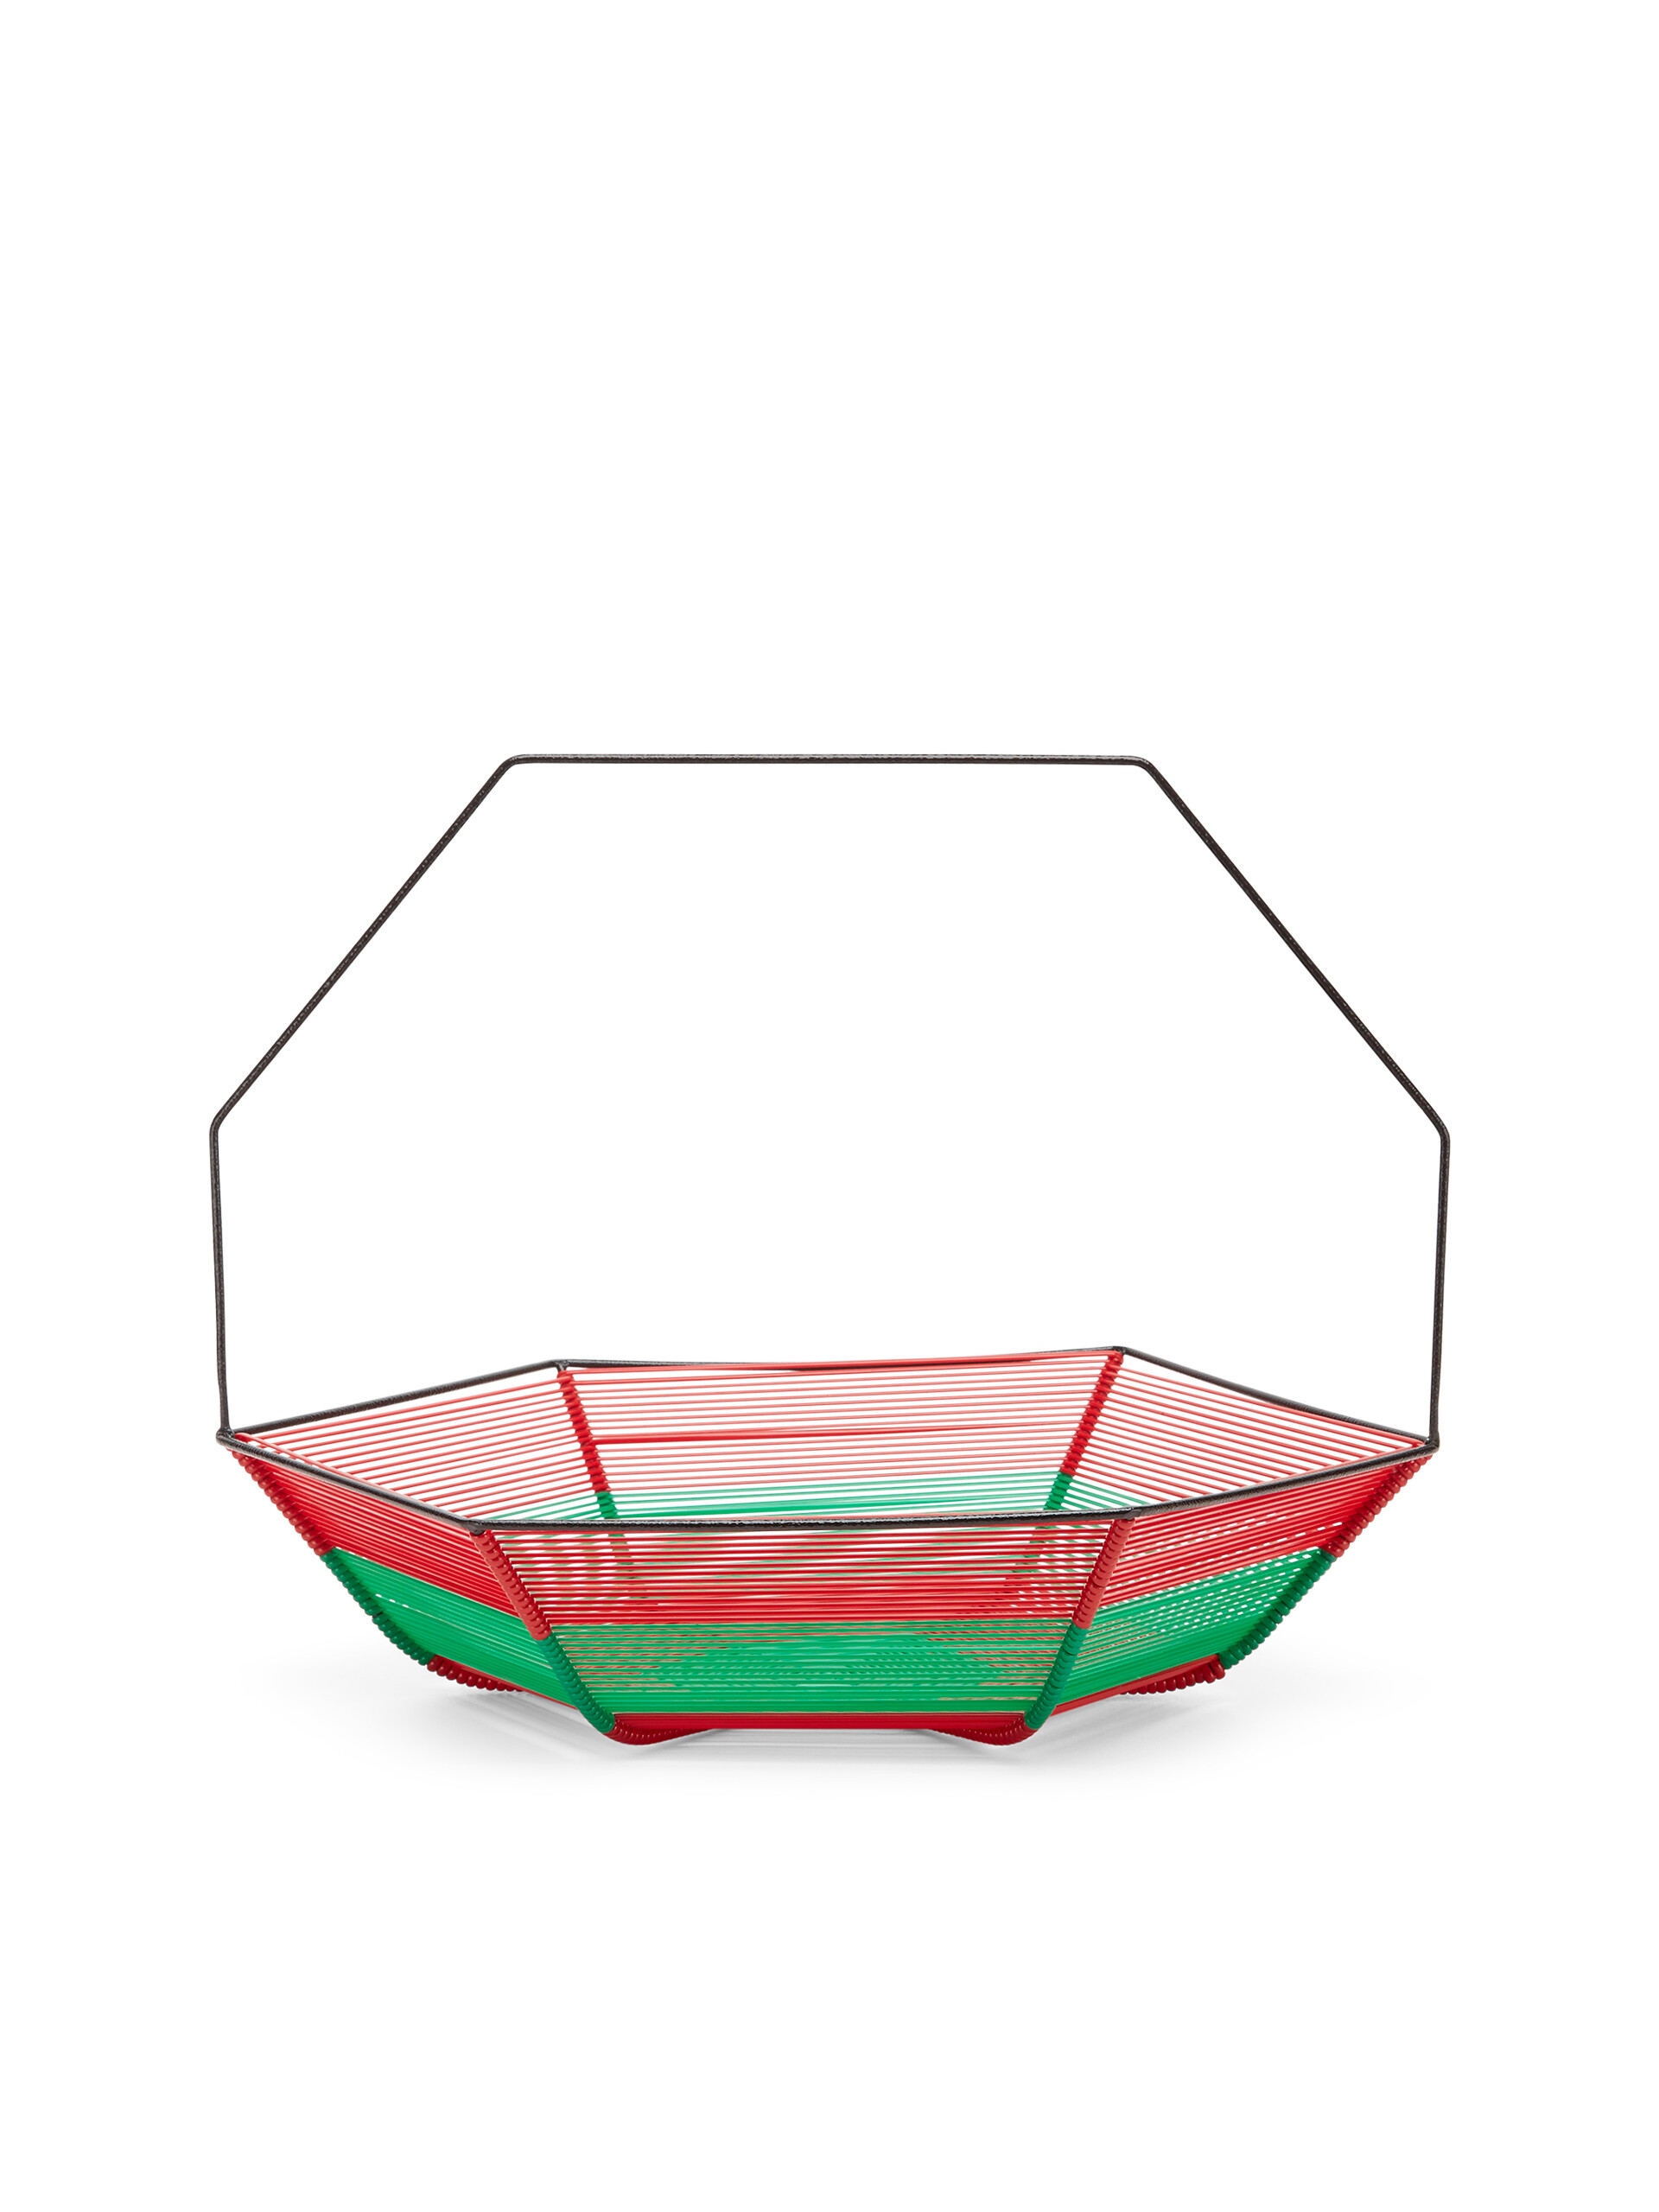 MARNI MARKET hexagonal green and red fruit holder - Accessories - Image 3